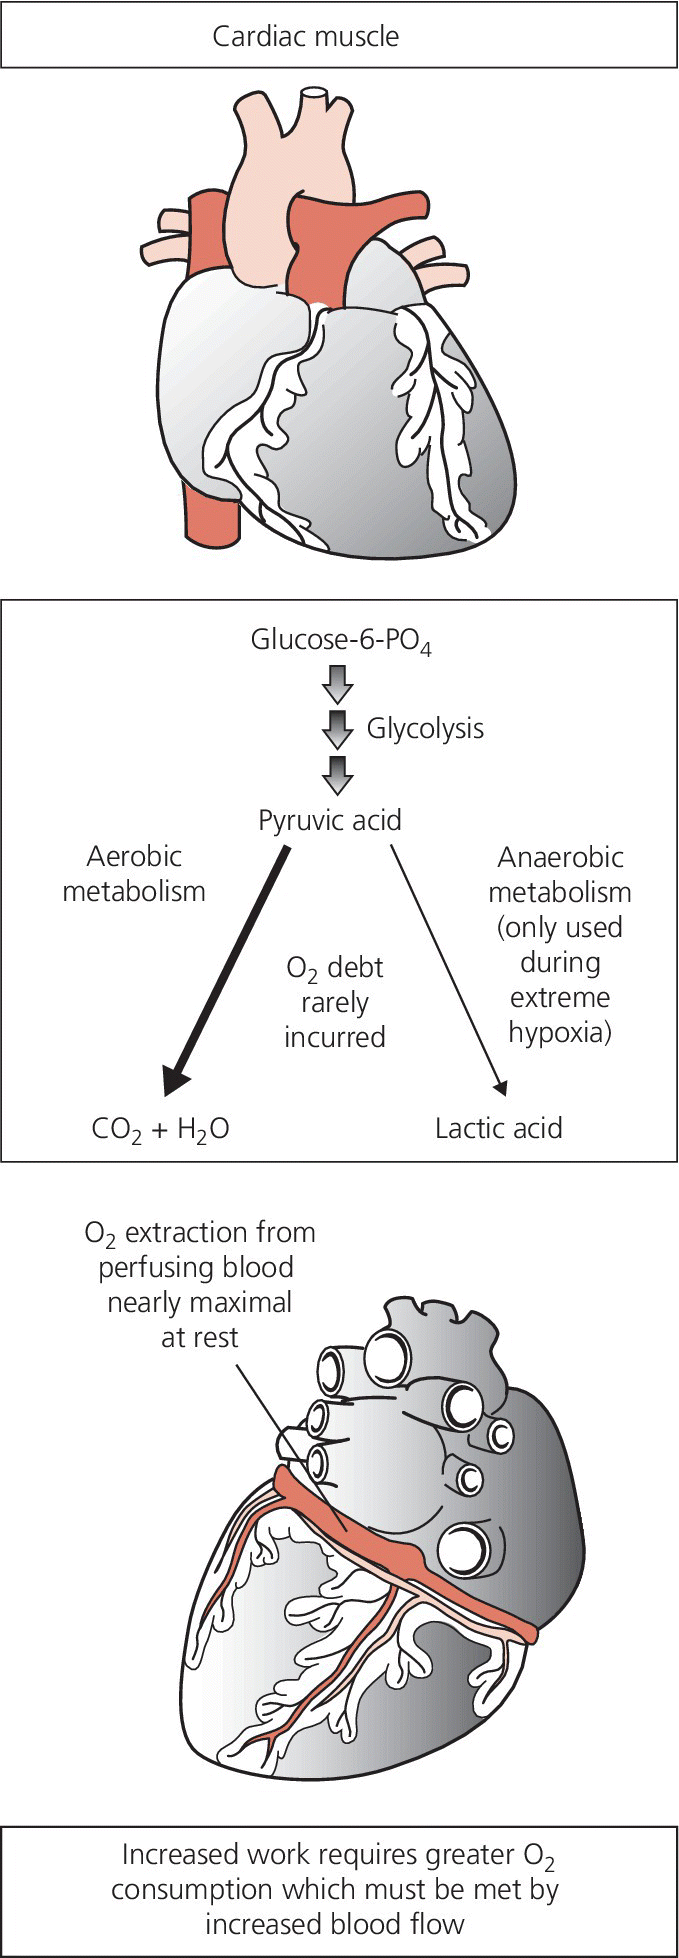 Illustration of the heart and its major vessels (top) and of the posterior heart highlighting the coronary sinus (bottom). Flow diagram of glucose-6-PO4 conversion to pyruvic acid, then to CO2 + H2O and lactic acid (center).